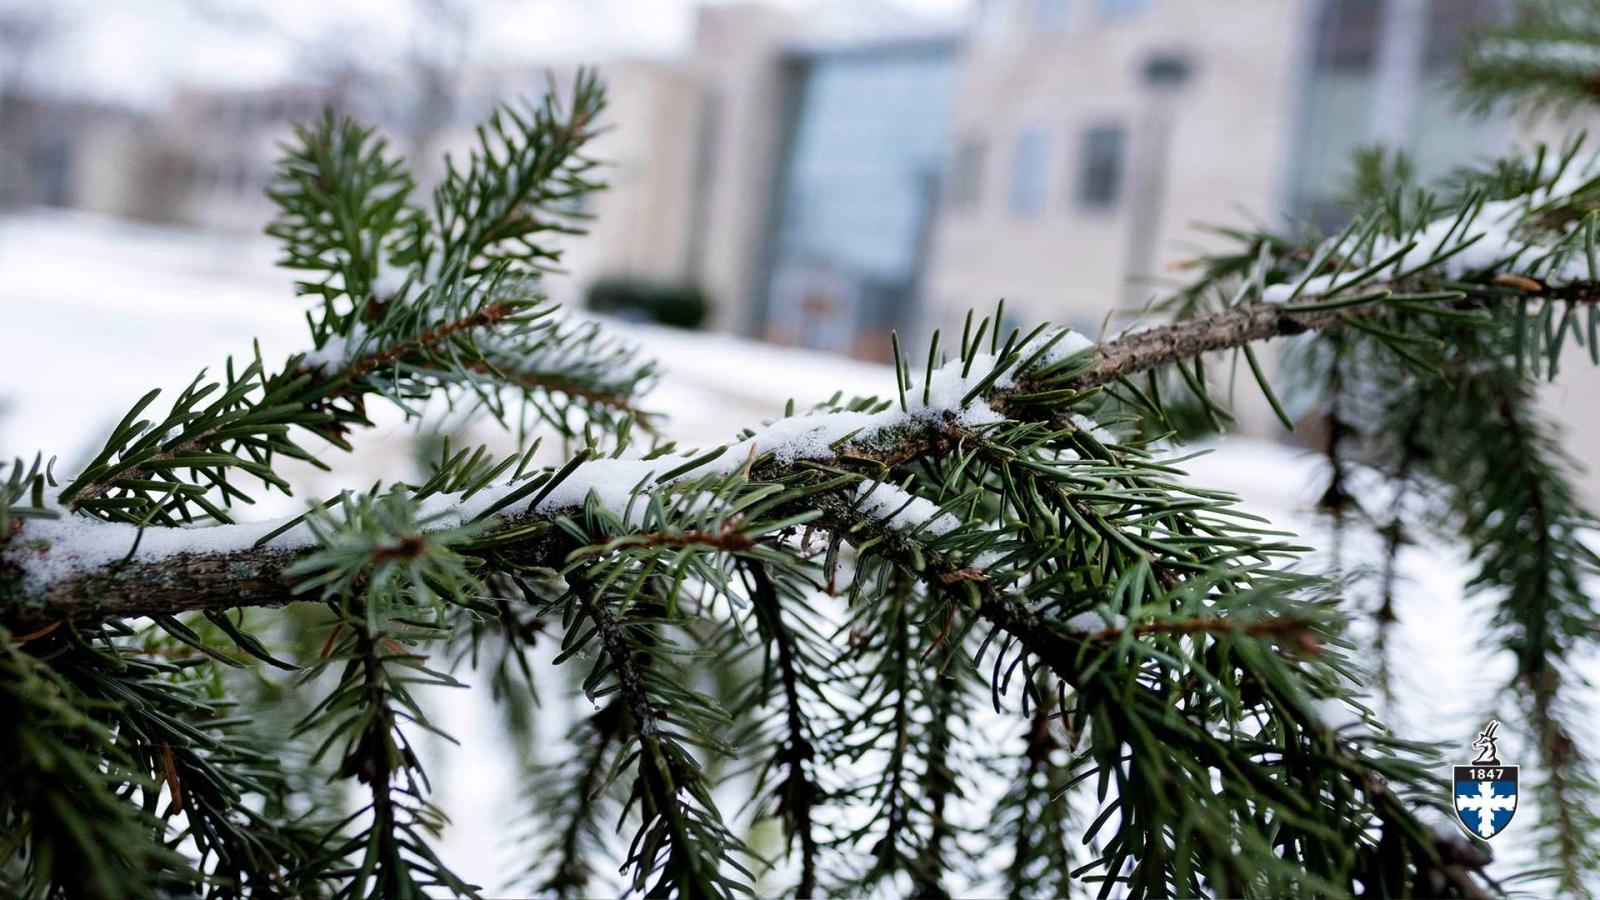 Pine branch with blurry Steitz Hall in background on an overcast winter day with snow on the ground.